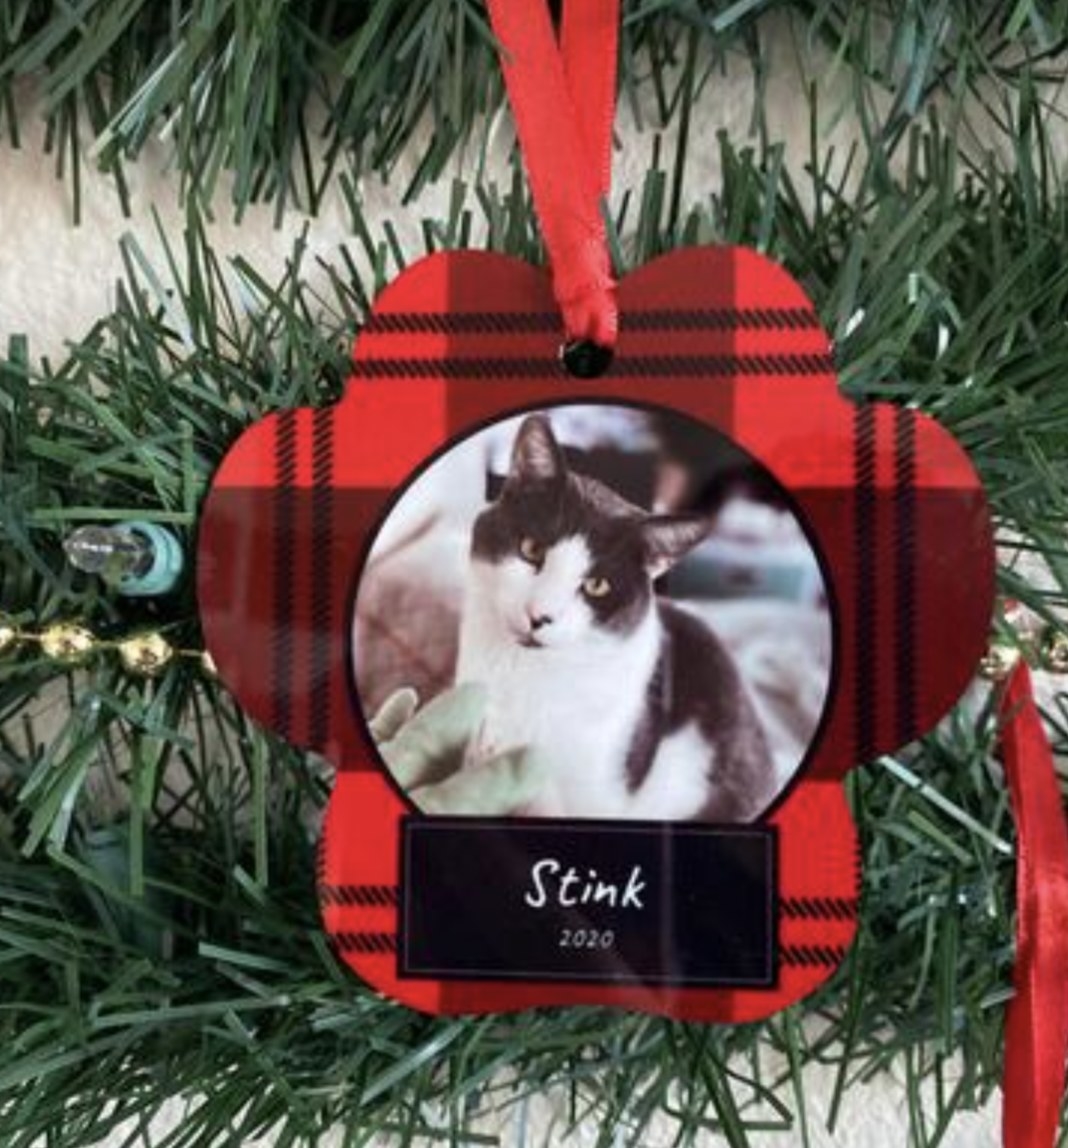 a plaid ornament with a photo of a cat with its name and birth year written underneath